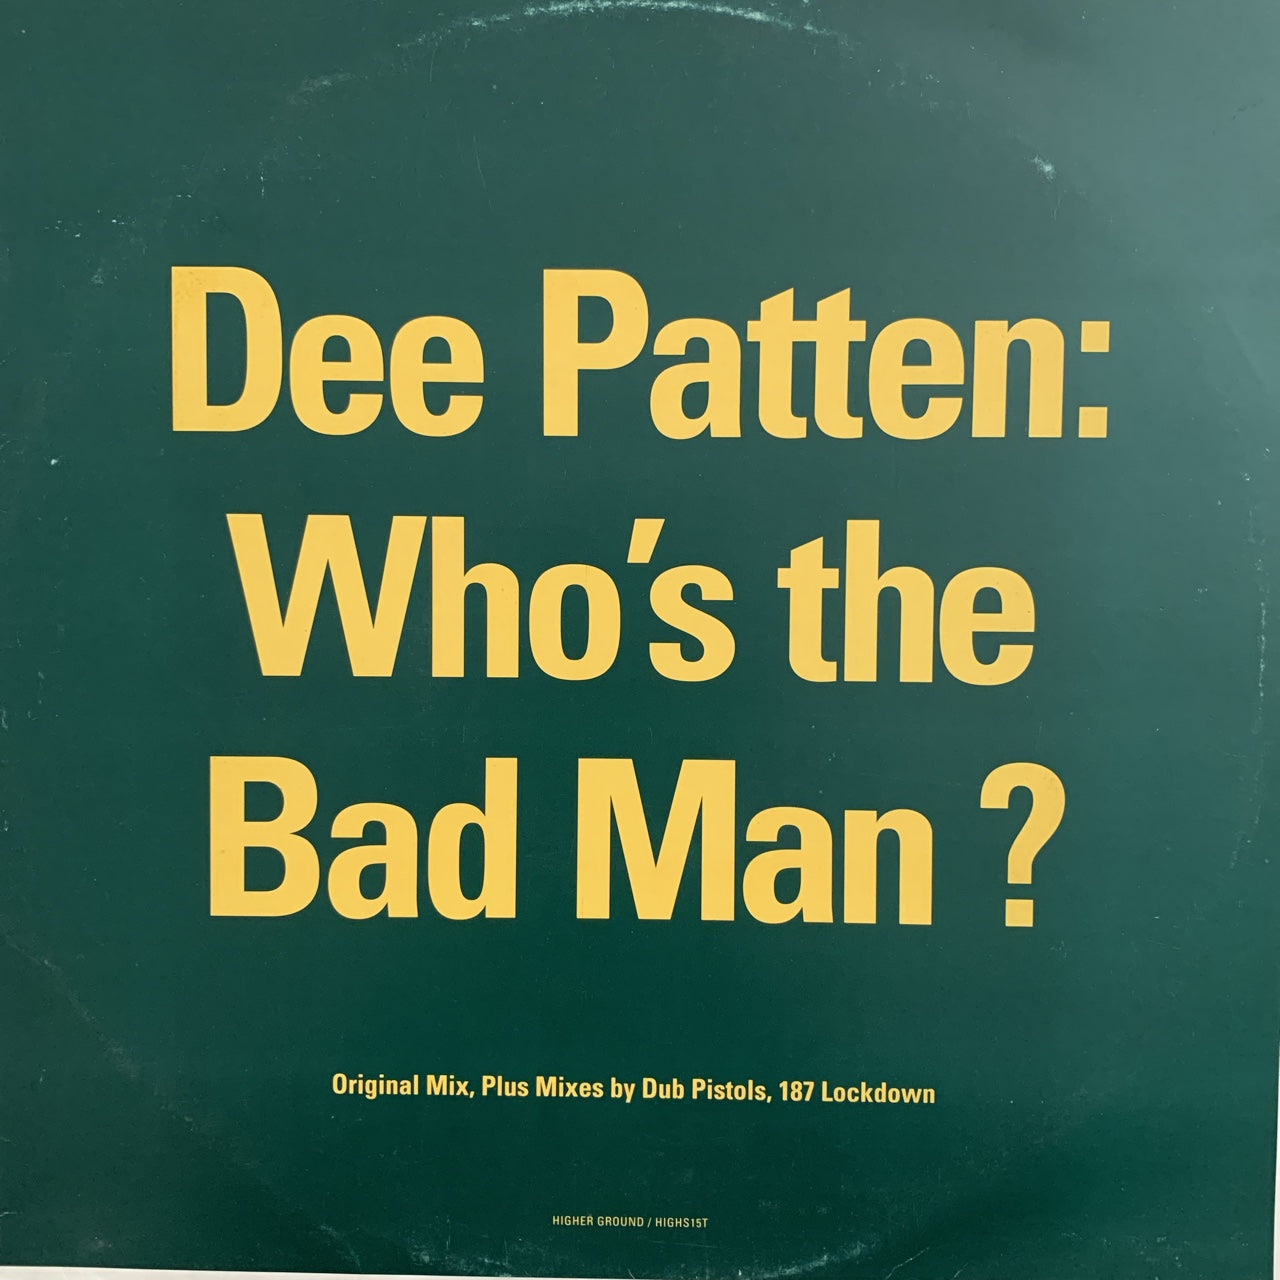 Dee Patten “Who’s the Bad Man?”